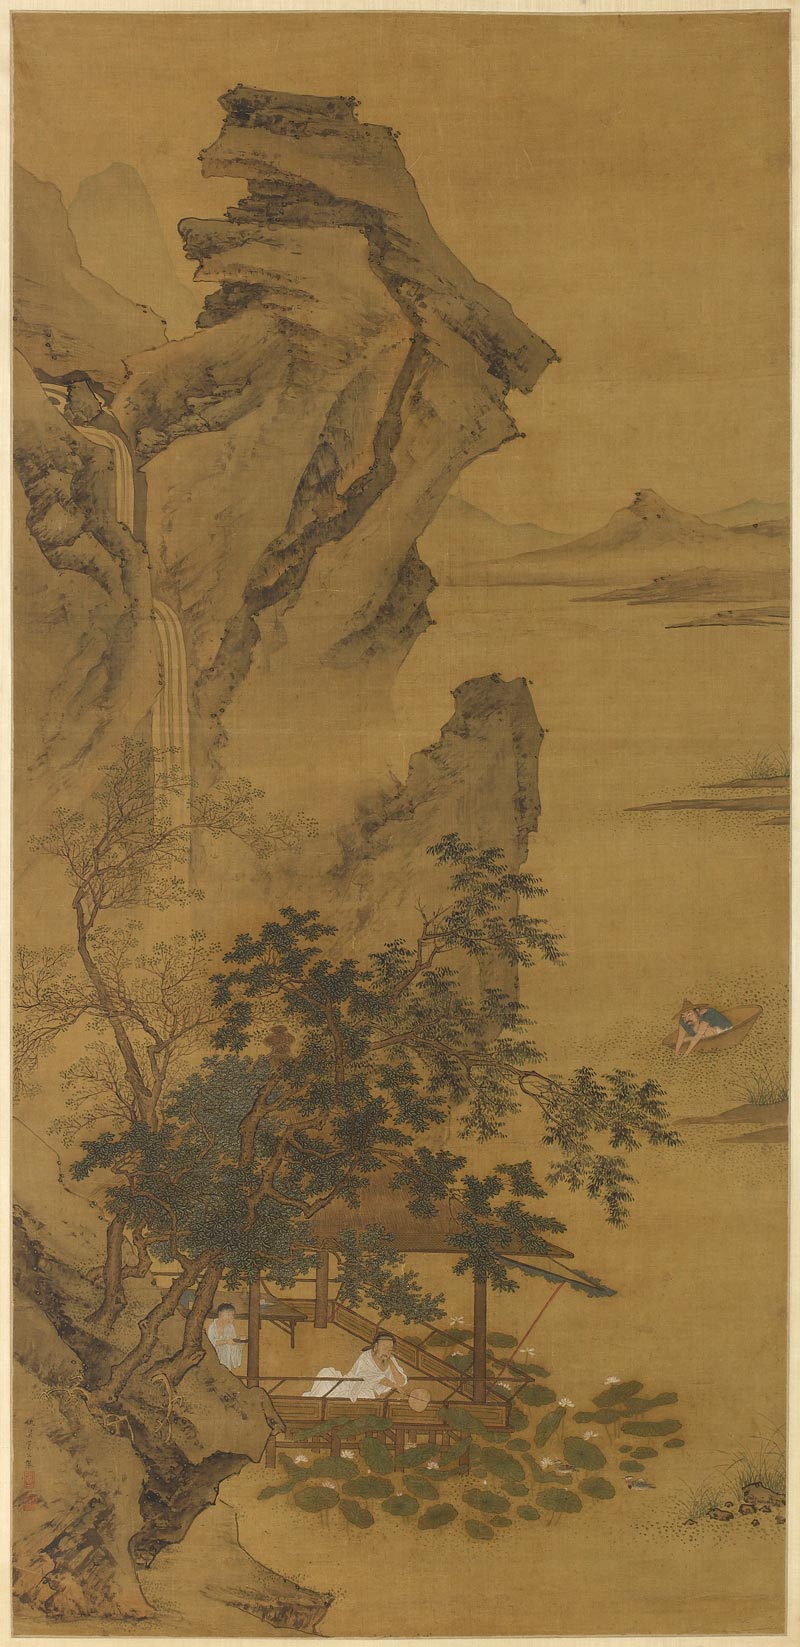 Ink and colors on a brown silk scroll, depicting a rock formation with a waterfall and a pavilion overlooking a pond of lotus leaves and flowers.